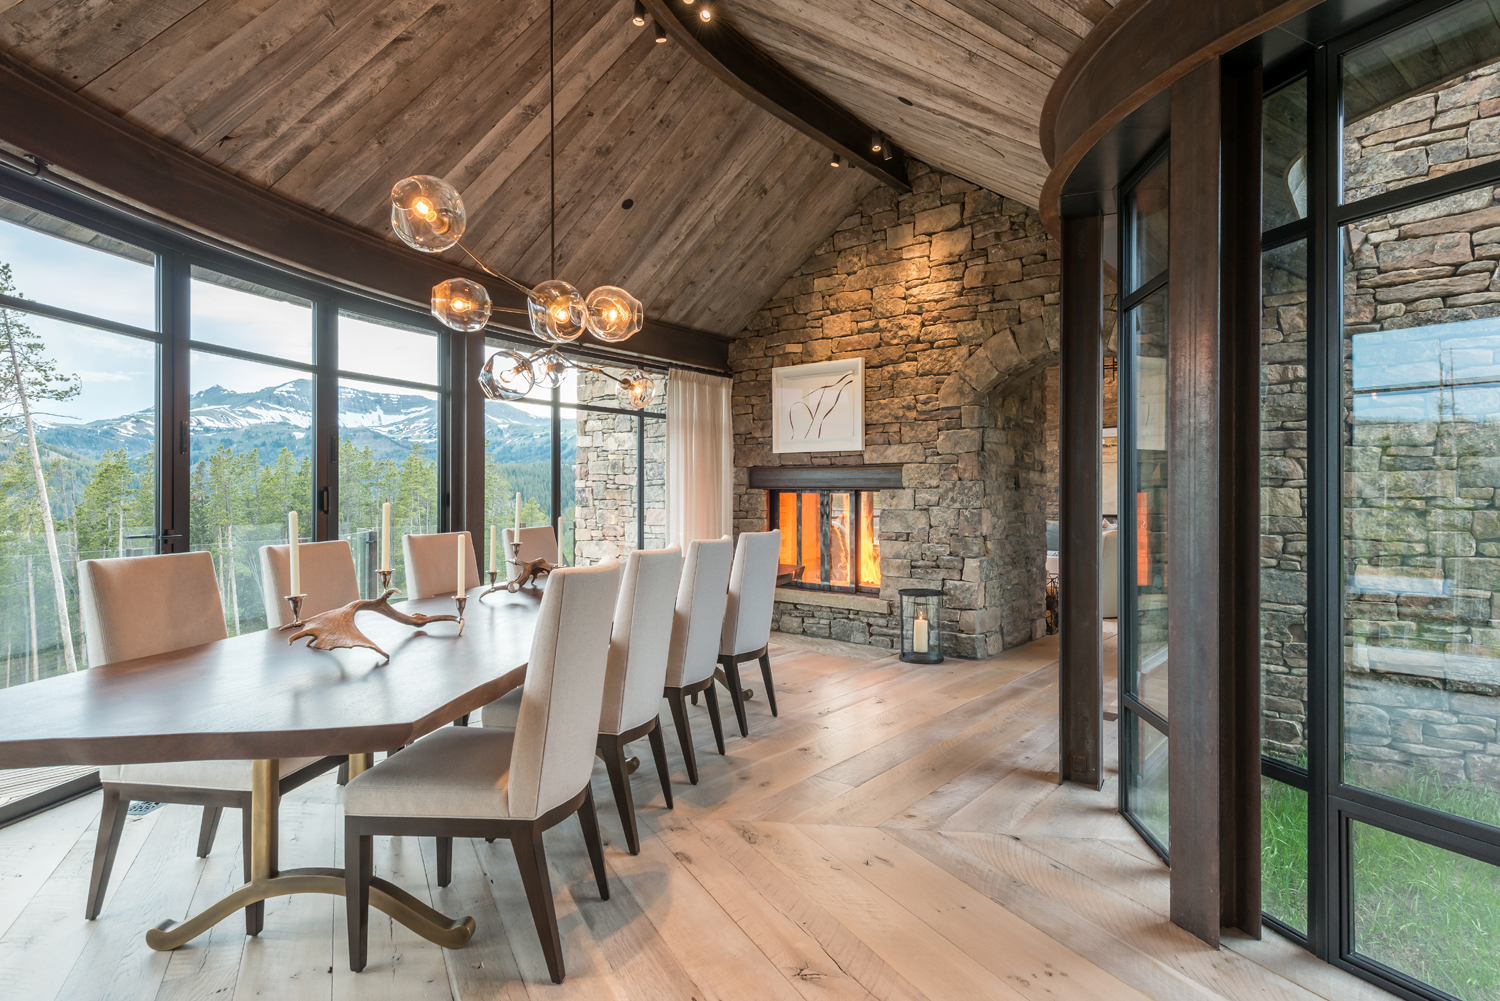 The curved glass-enclosed dining room, a signature design of JLF, frames mountain views and takes cues from rustic architectural materials in this Montana home (photo by Audrey Hall).